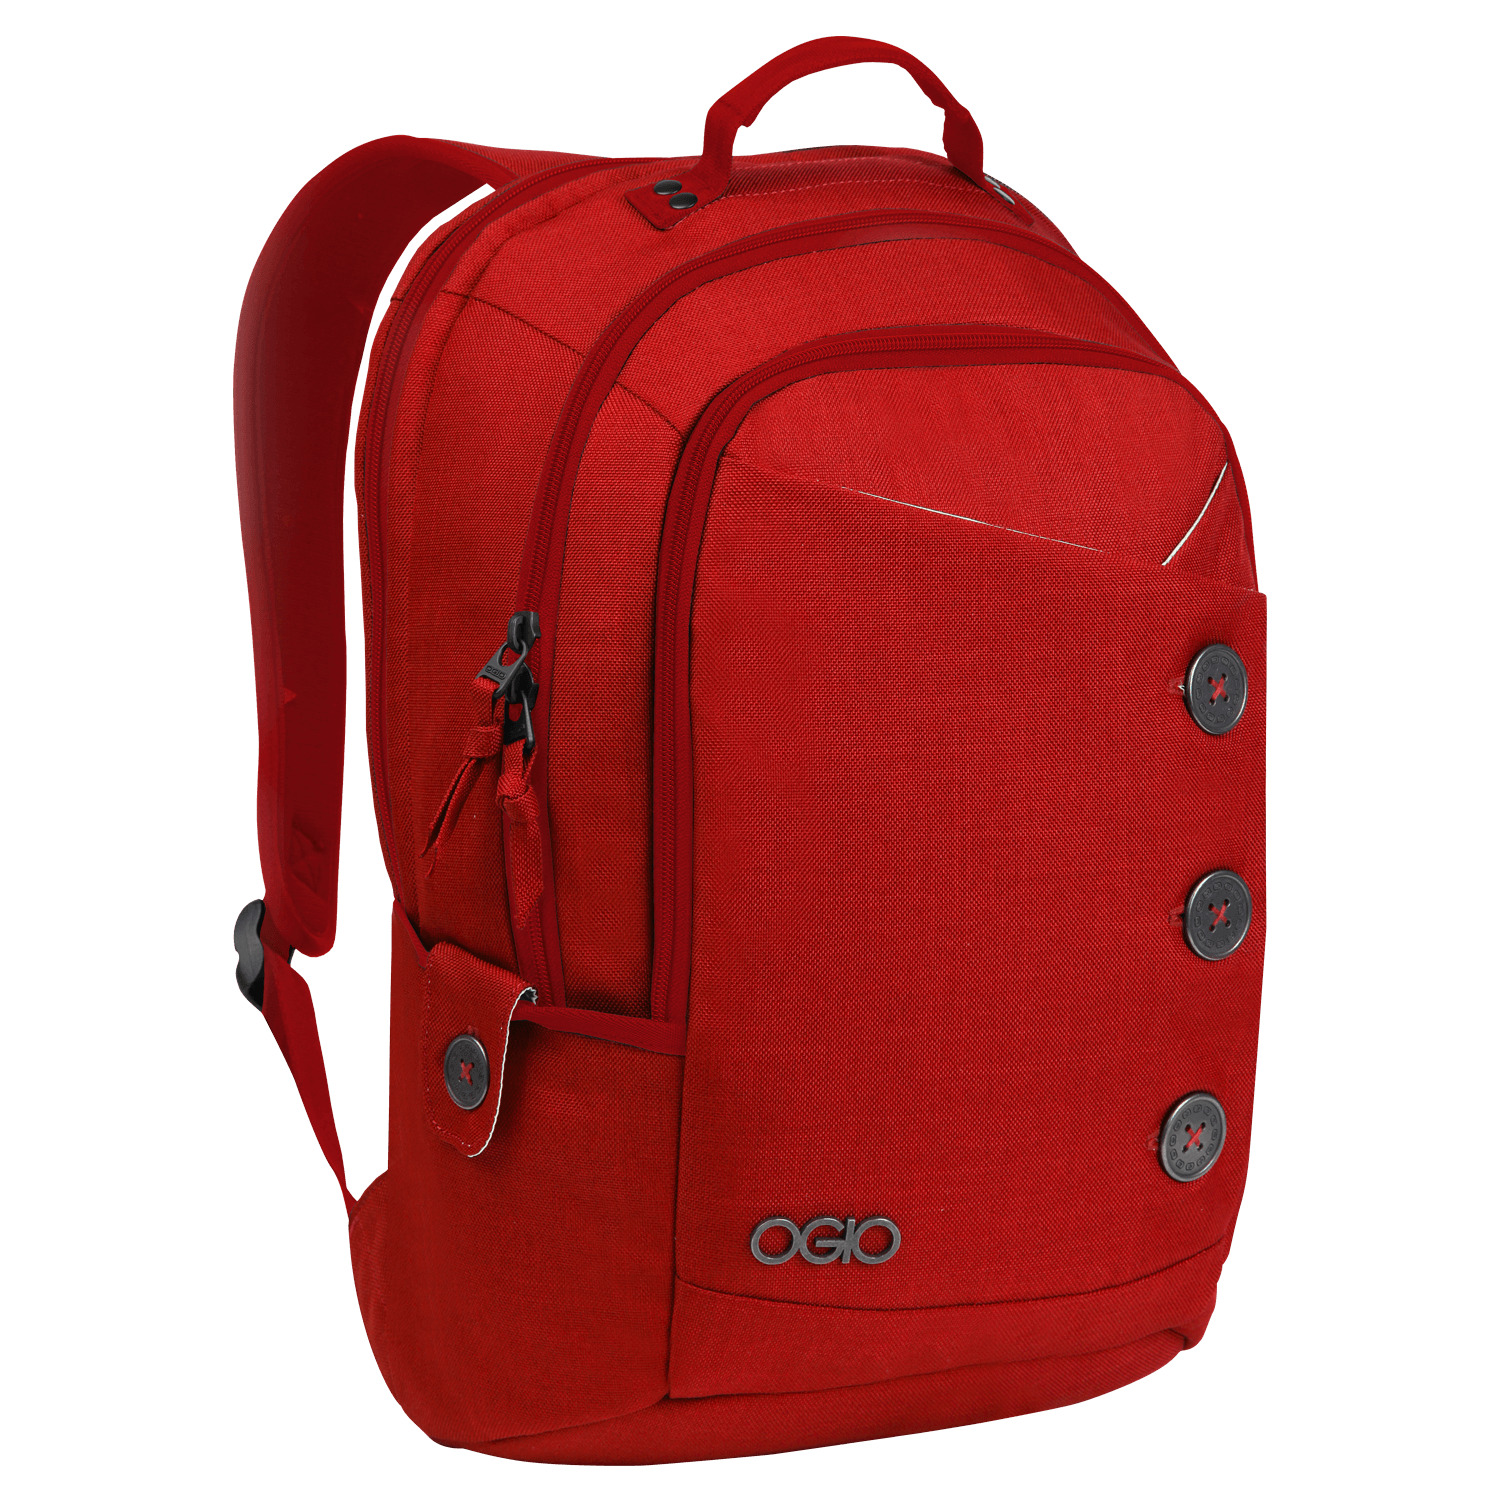 Ogio Red Backpack icons